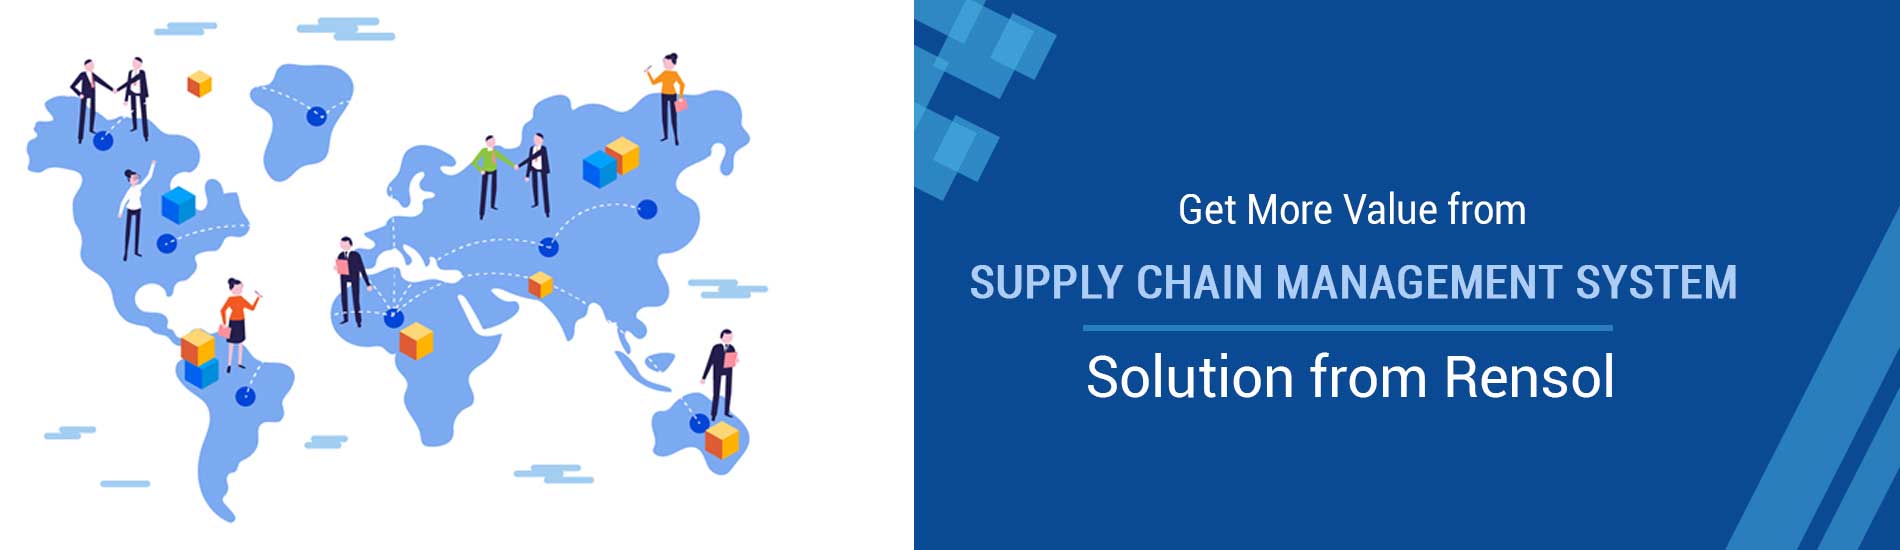 Supply chain management system